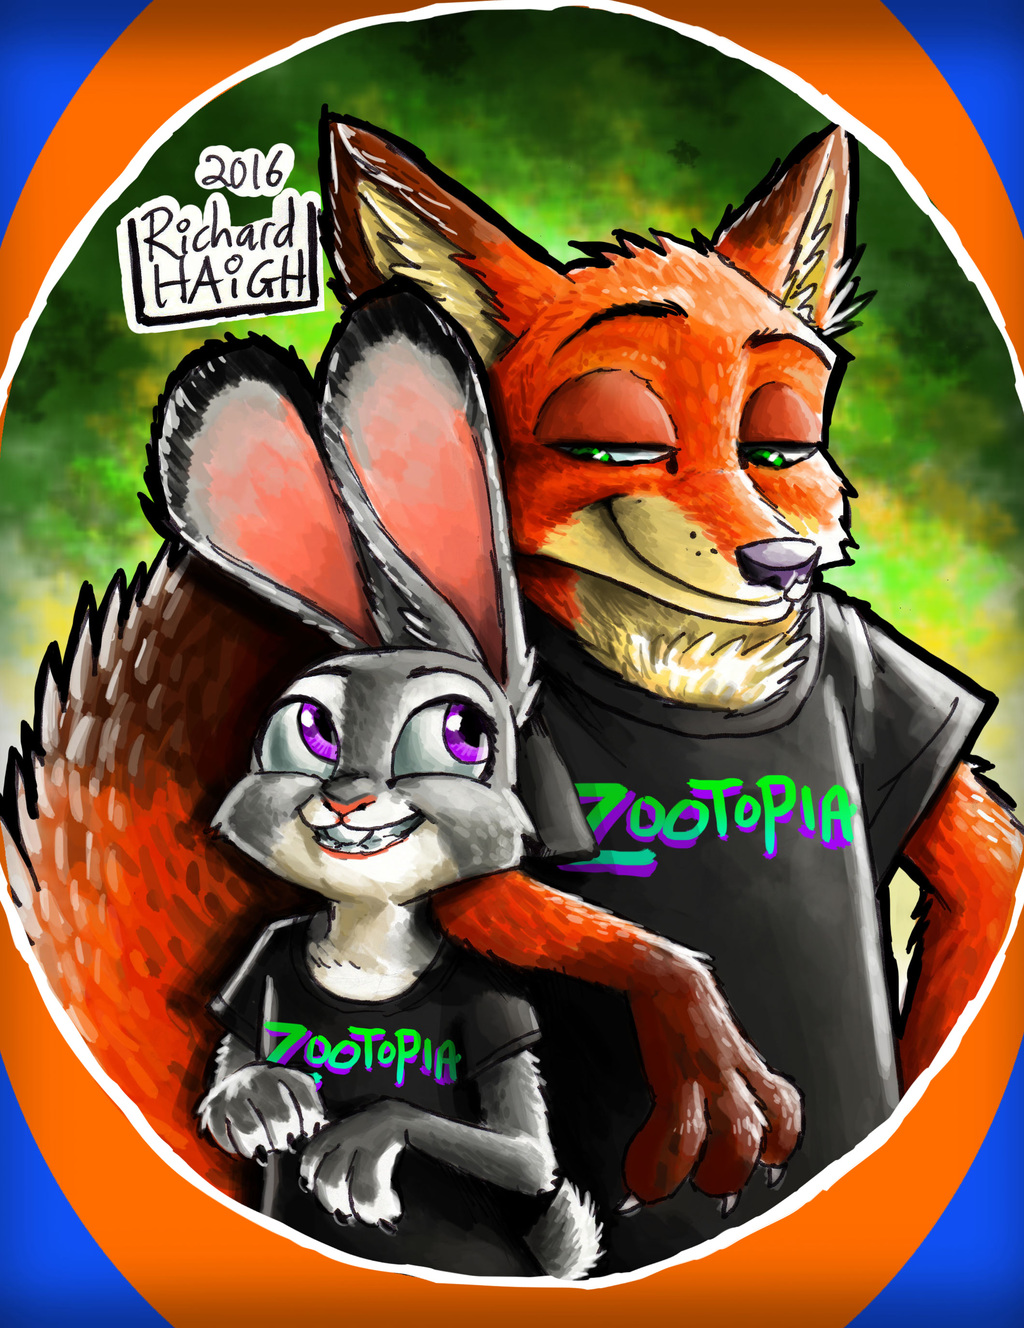 Most recent image: Zootopia - Release